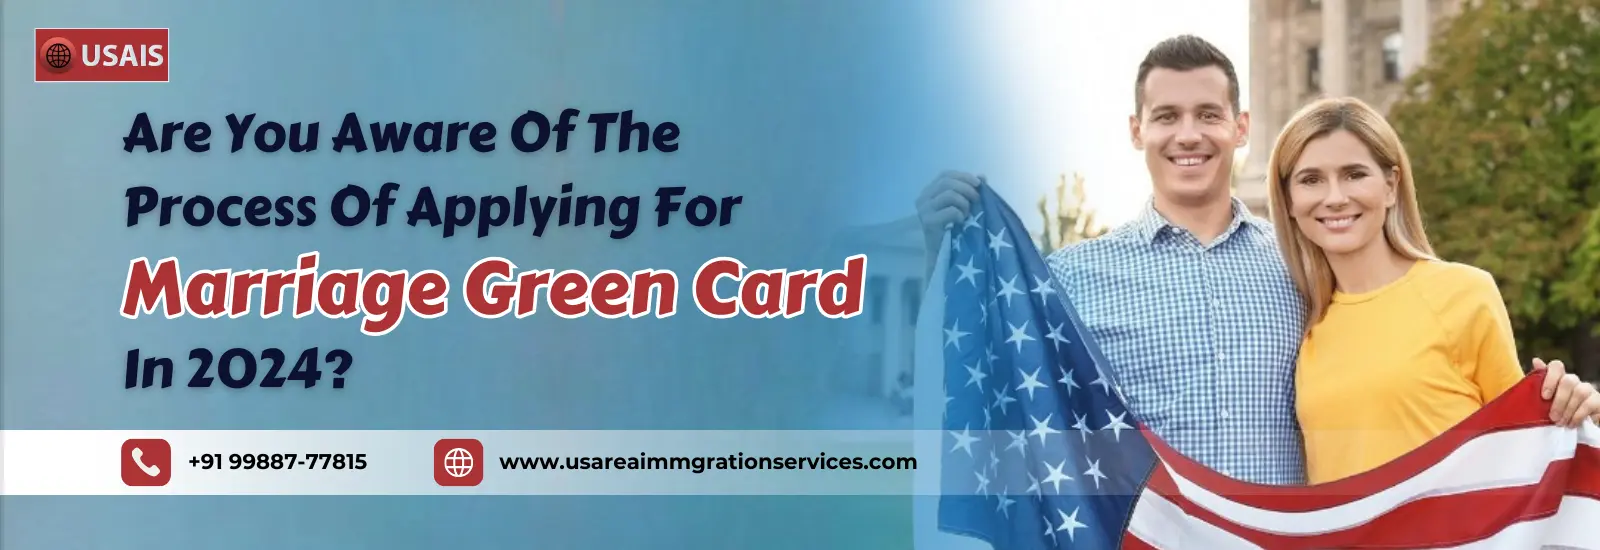 Marriage-Green-Card